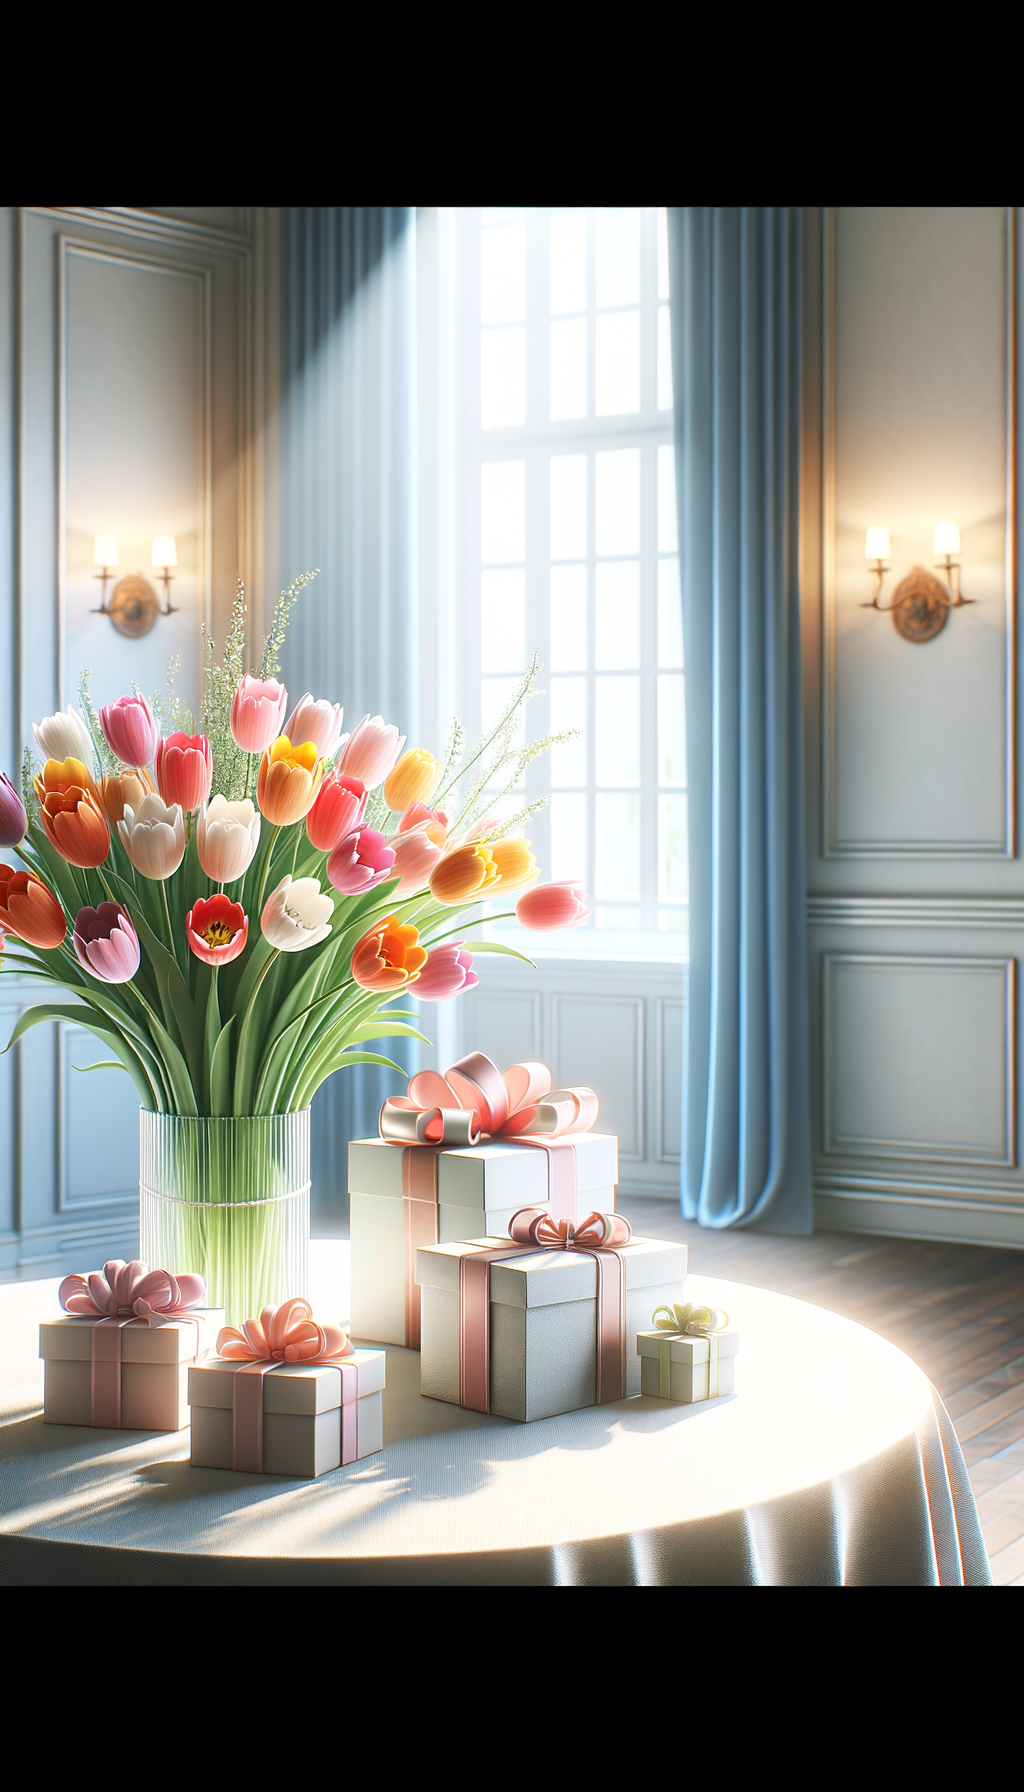 bouquet of tulips in the room, gifts, window in the background